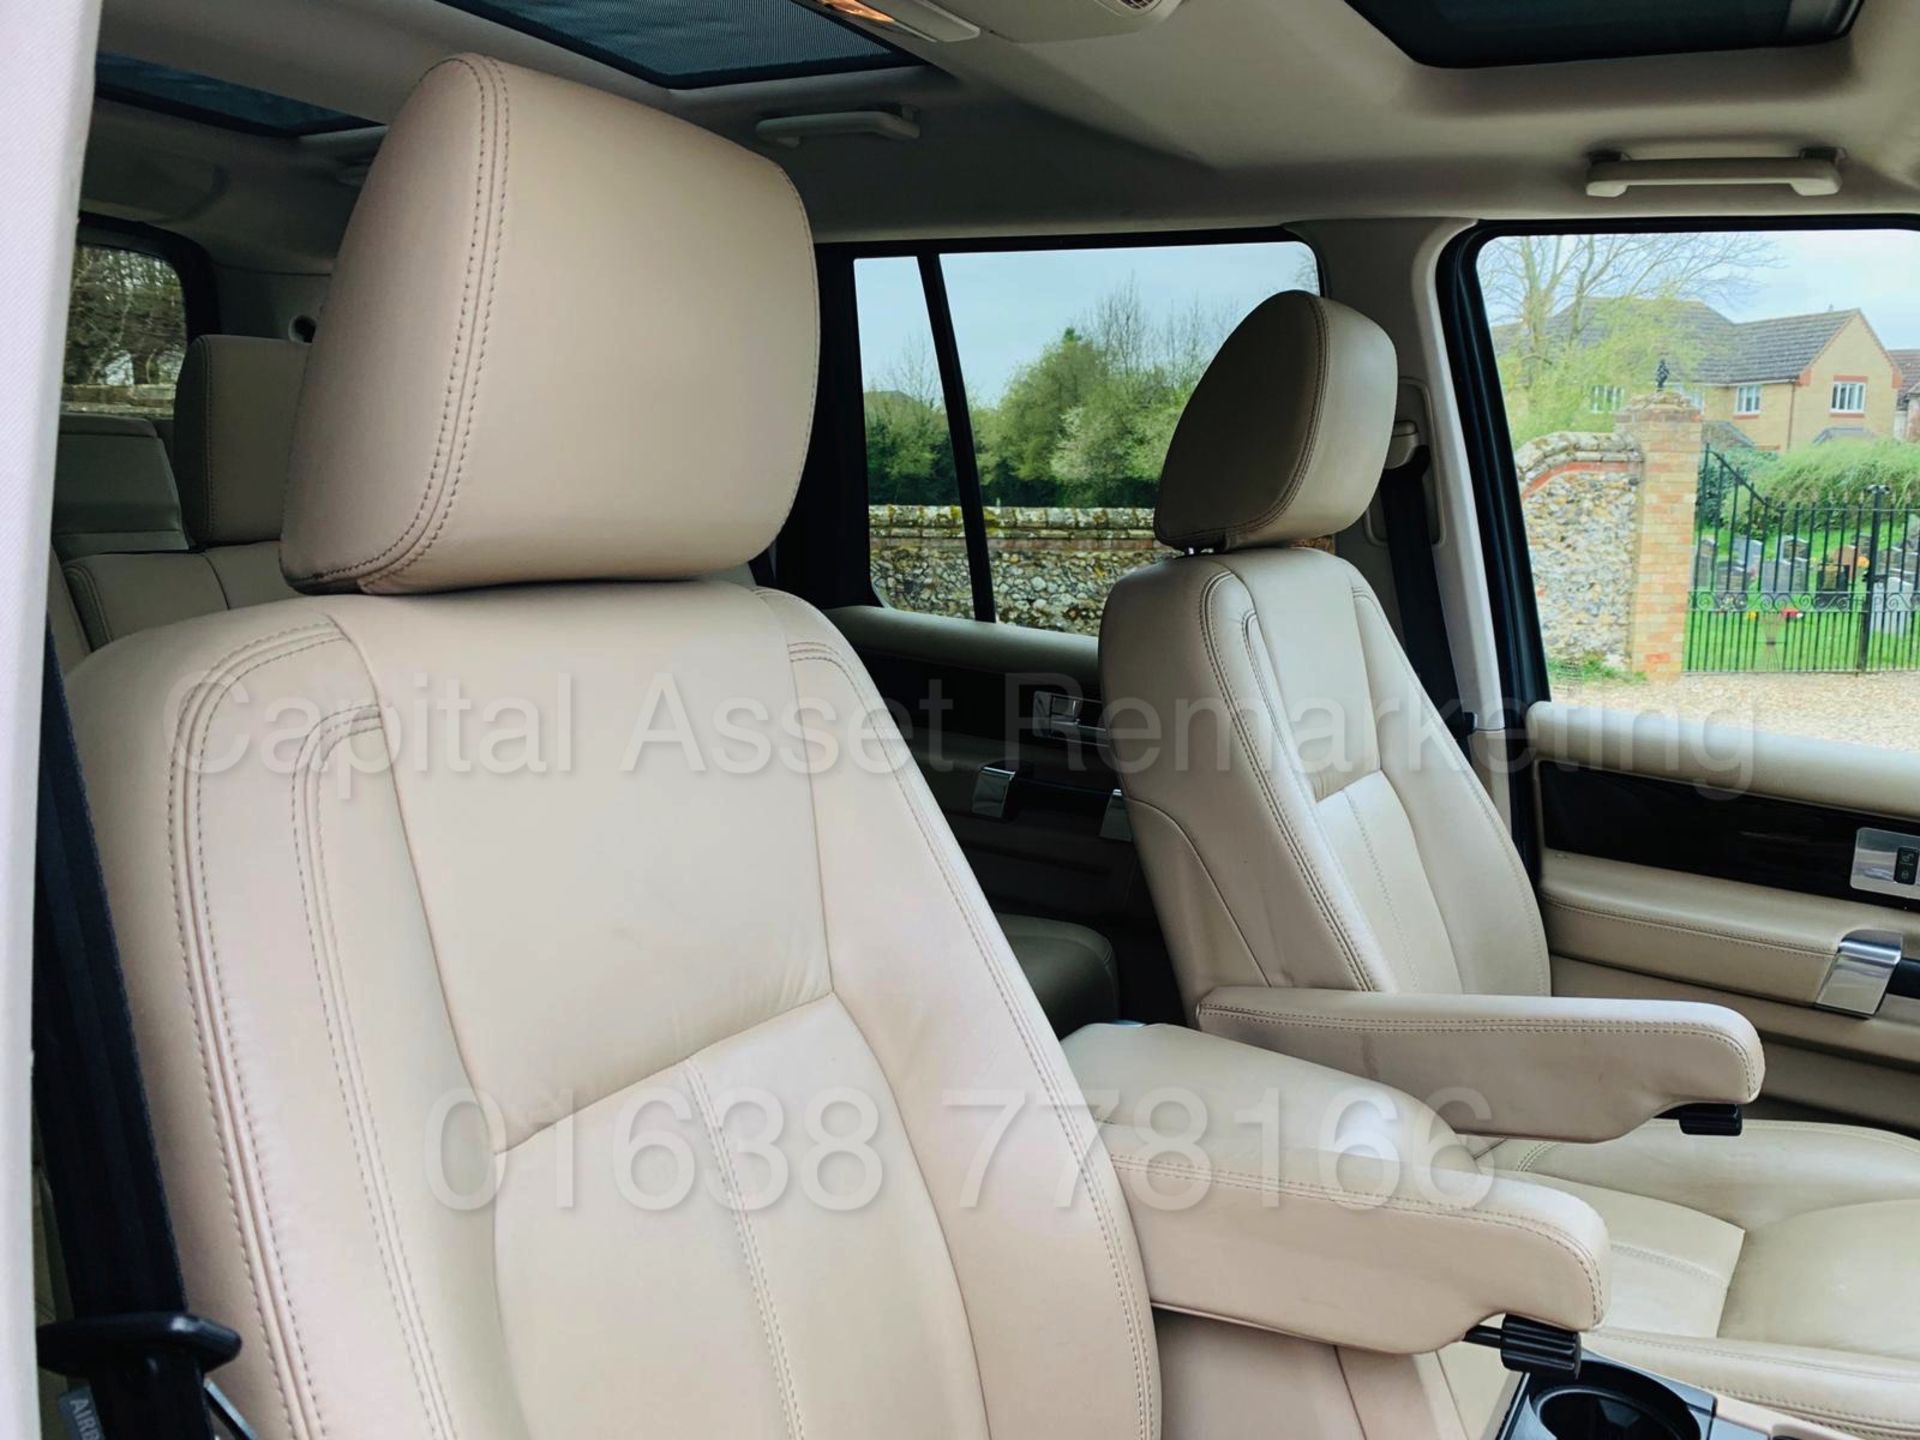 LAND ROVER DISCOVERY *HSE EDITION* 7 SEATER SUV (2012 MODEL) '3.0 SDV6- 8 SPEED AUTO' **HUGE SPEC** - Image 31 of 48